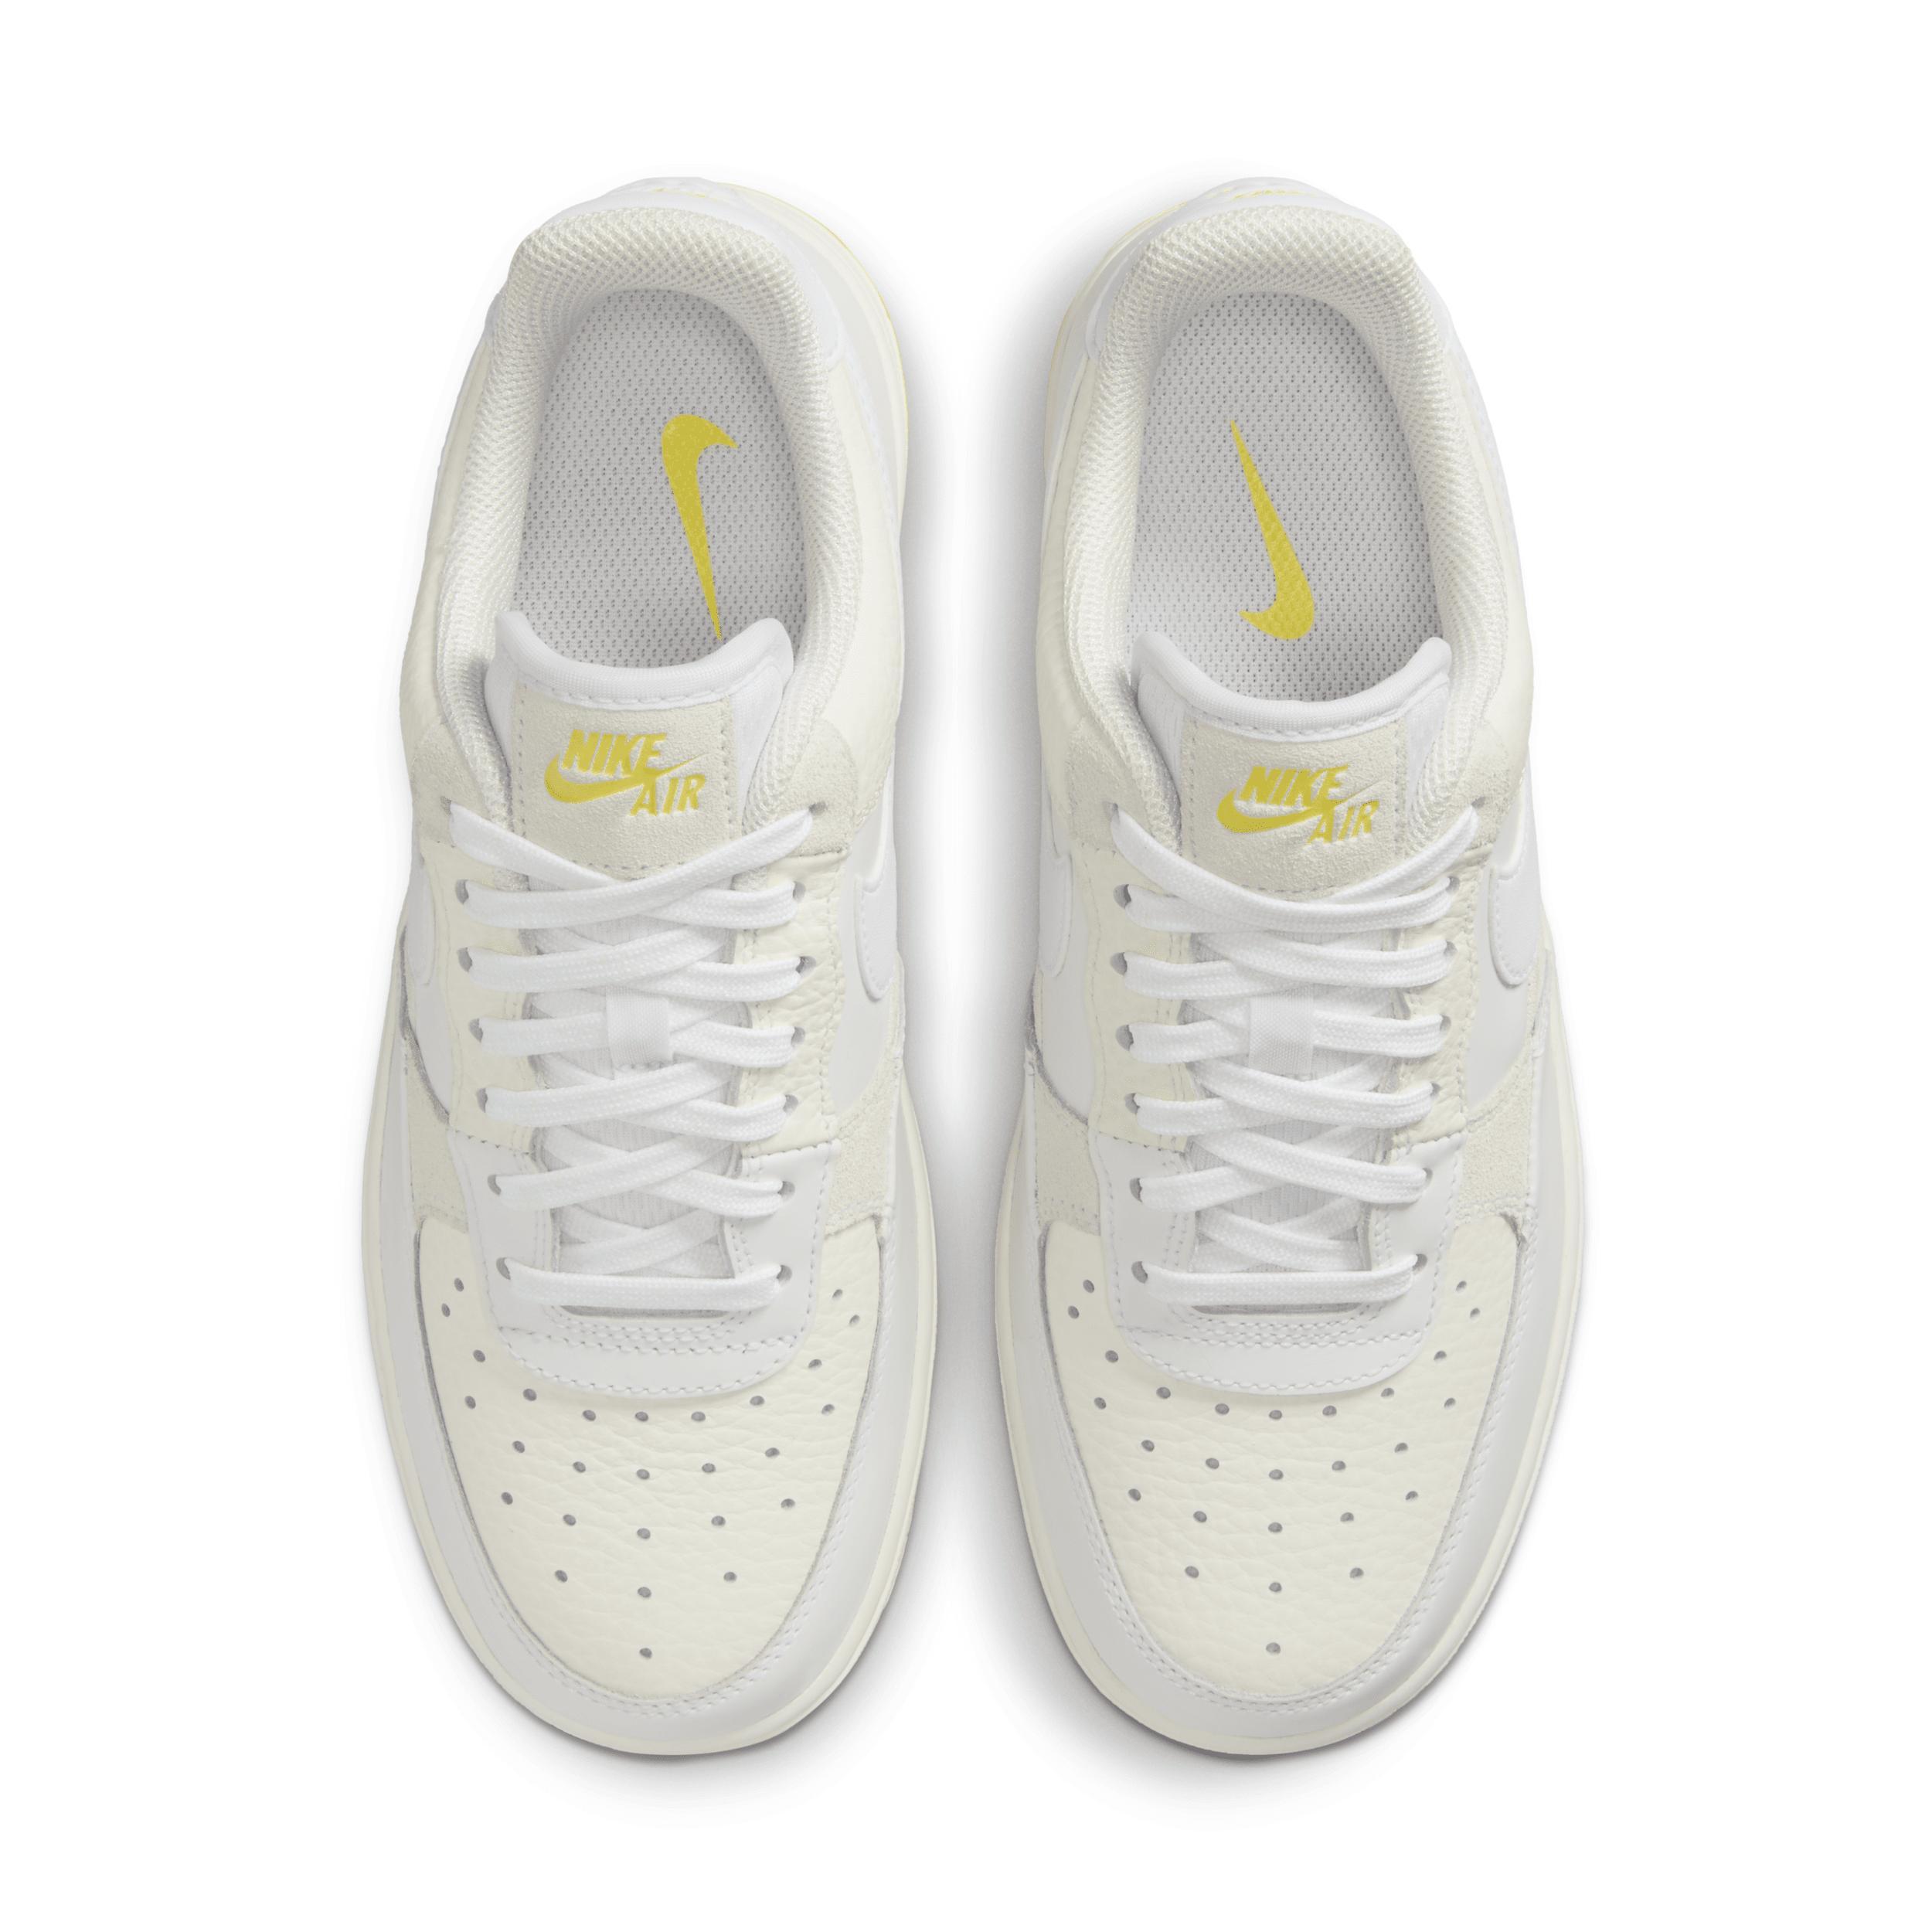 Nike Women's Air Force 1 '07 Low Shoes Product Image